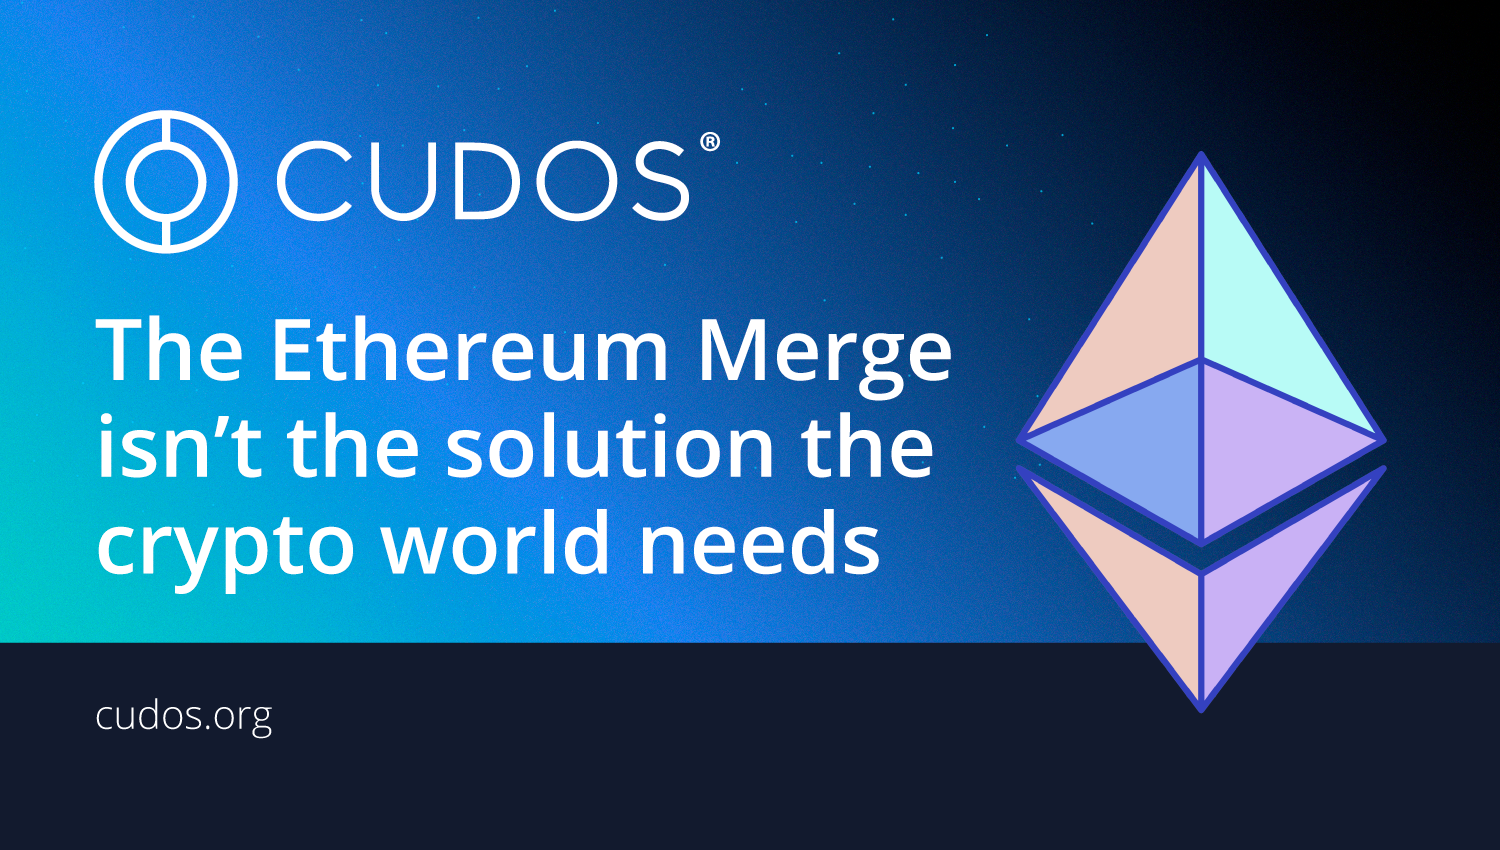 The Ethereum Merge isn’t the solution the crypto world needs